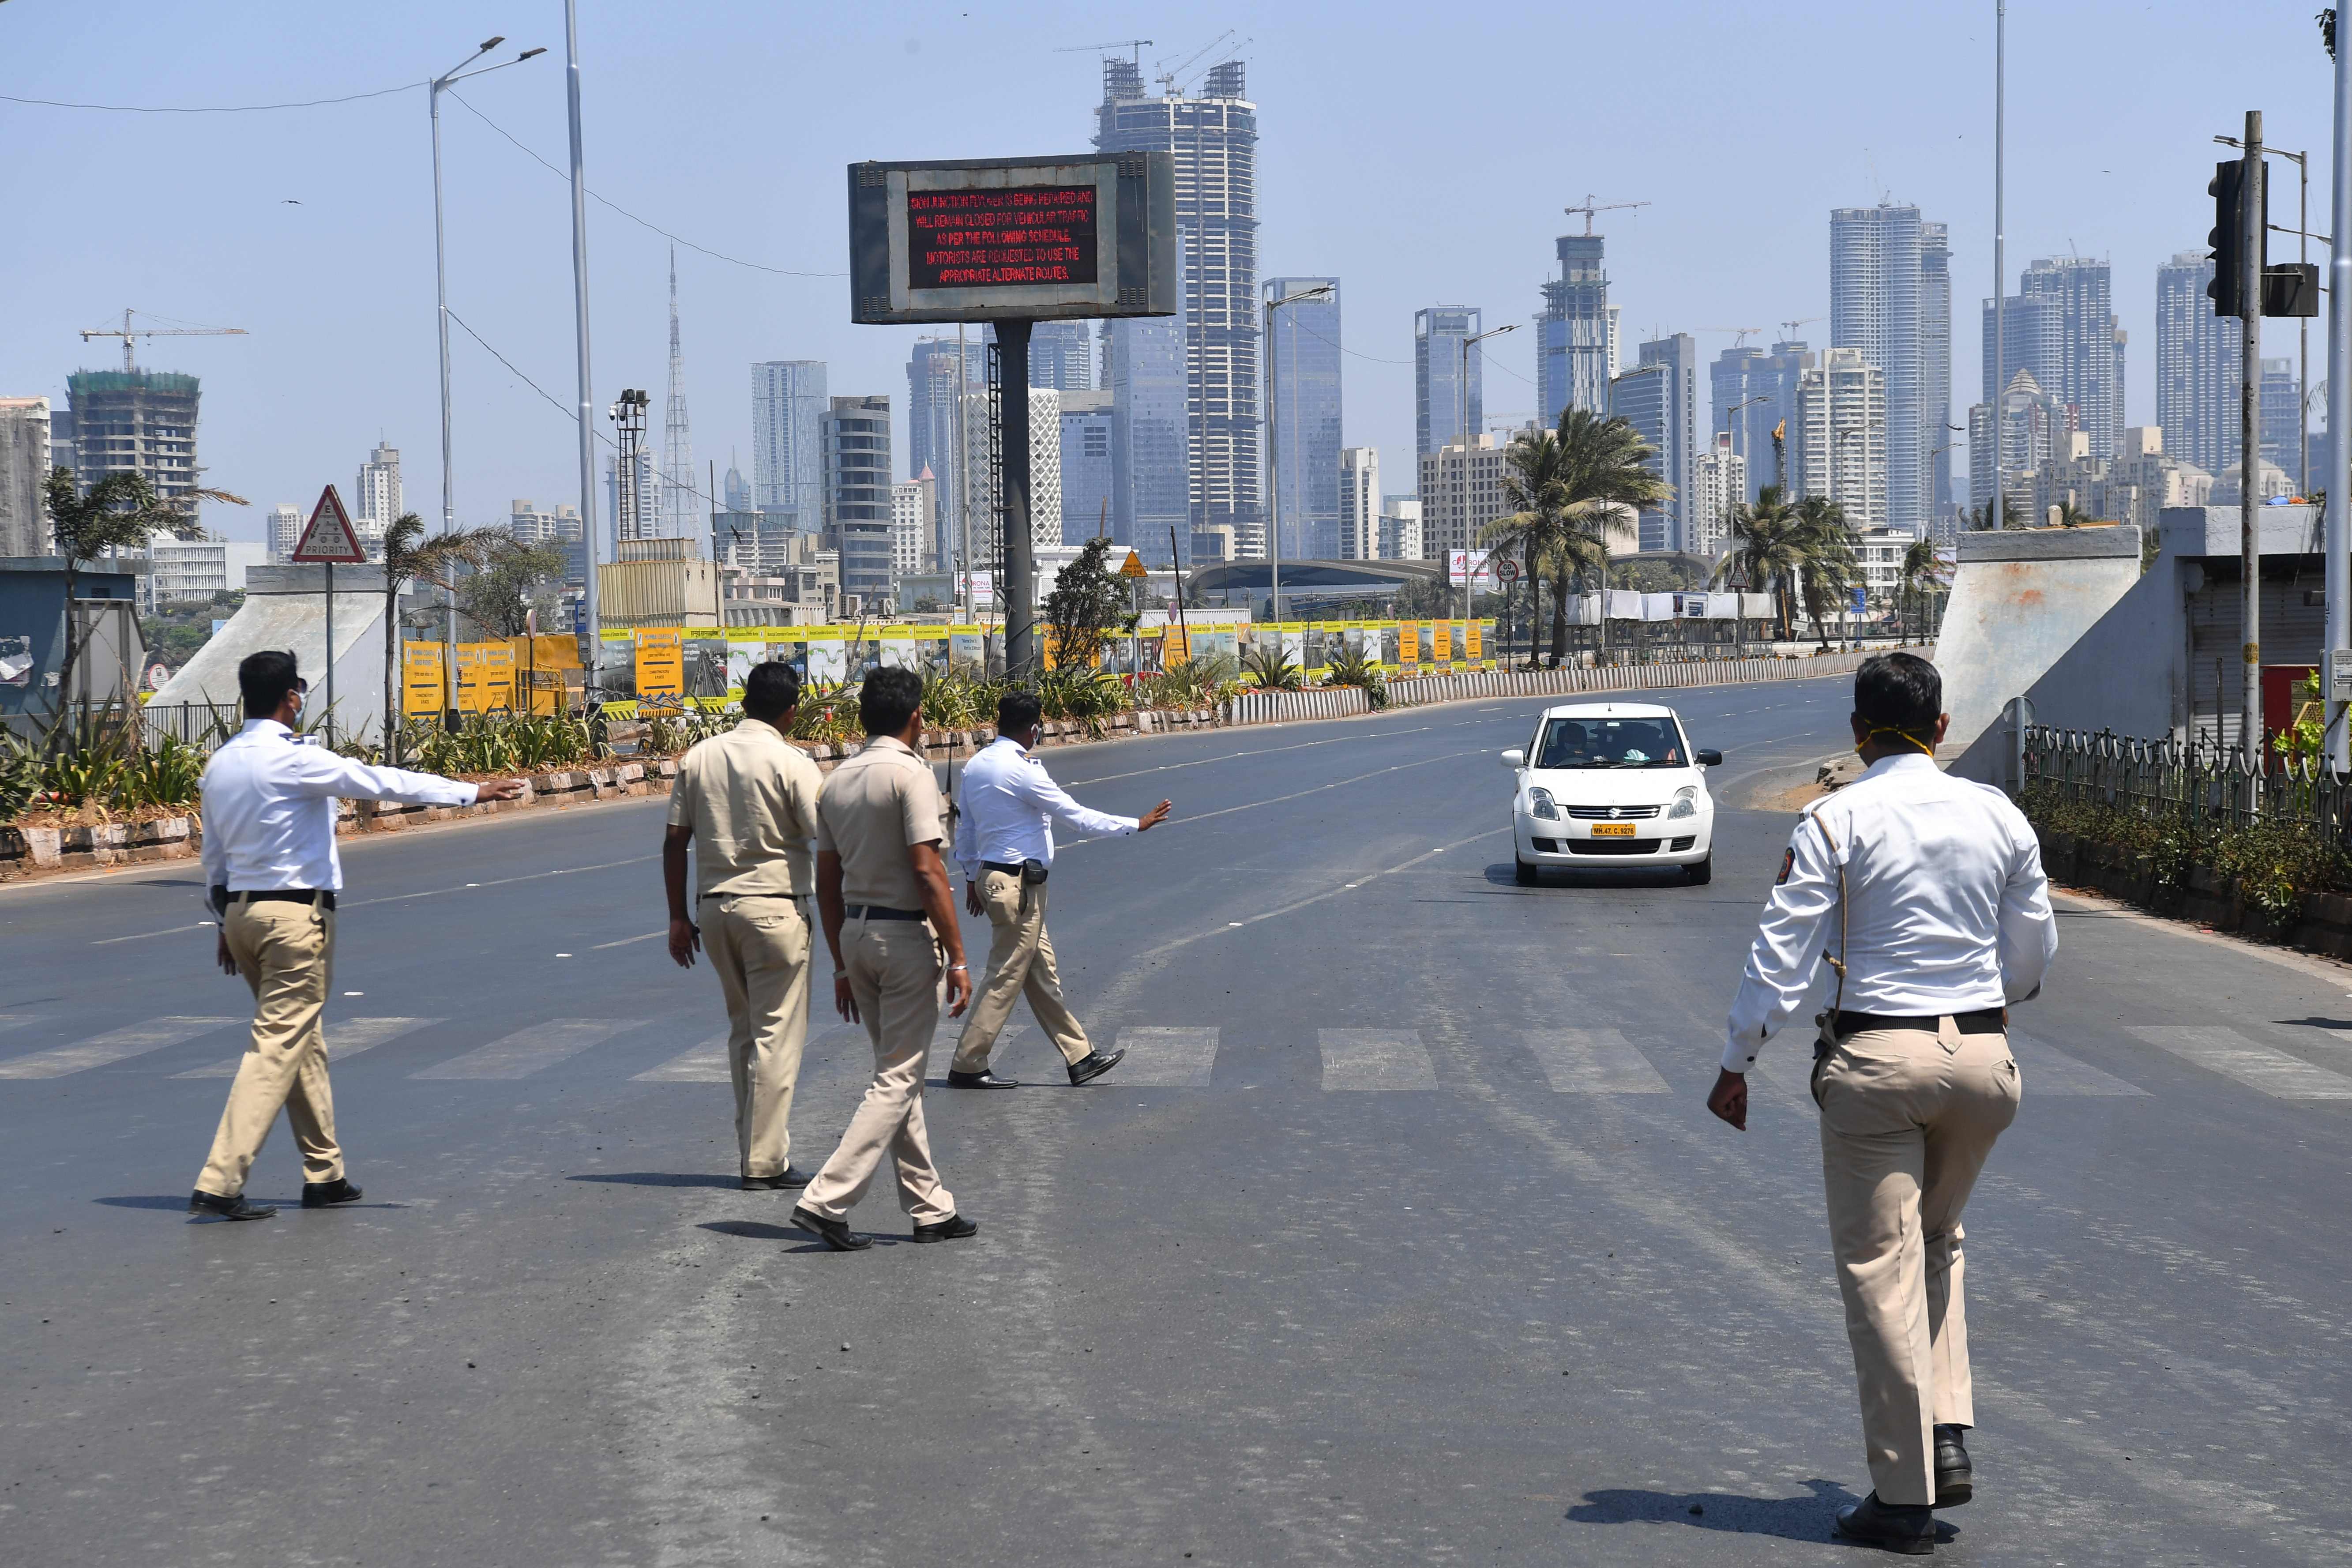 Police personnel prepare to stop a car during a nationwide one-day Janata (civil) curfew imposed as a preventive measure against the COVID-19 coronavirus, in Mumbai on March 22, 2020. - Nearly one billion people around the world were confined to their homes, as the coronavirus death toll crossed 13,000 and factories were shut in worst-hit Italy after another single-day fatalities record. (Photo by INDRANIL MUKHERJEE / AFP)